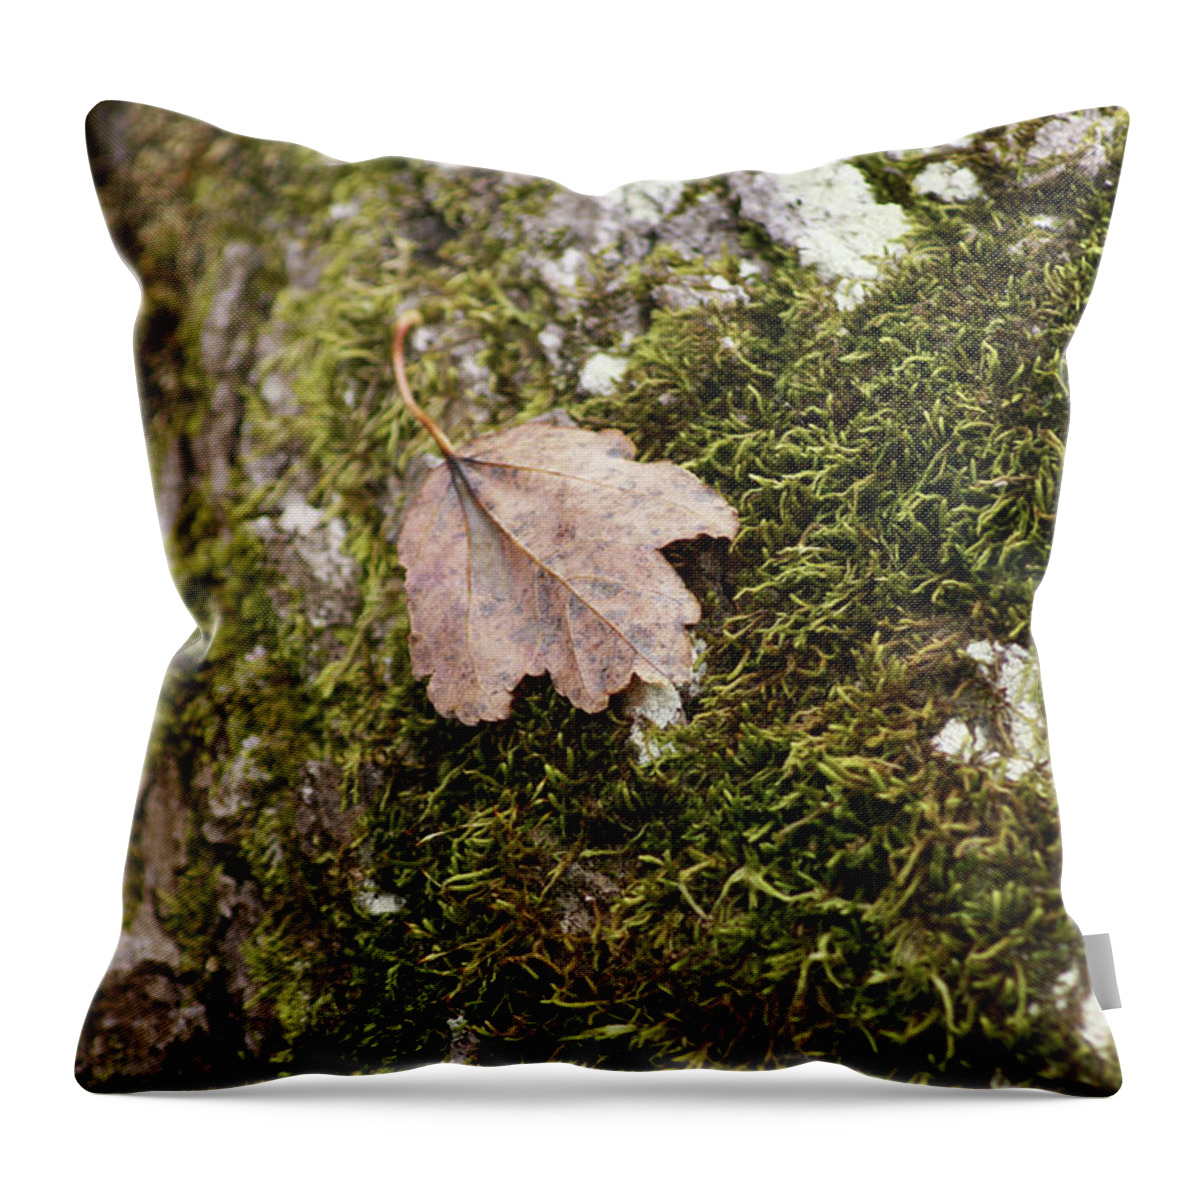  Throw Pillow featuring the photograph Moss Leaf by Heather E Harman